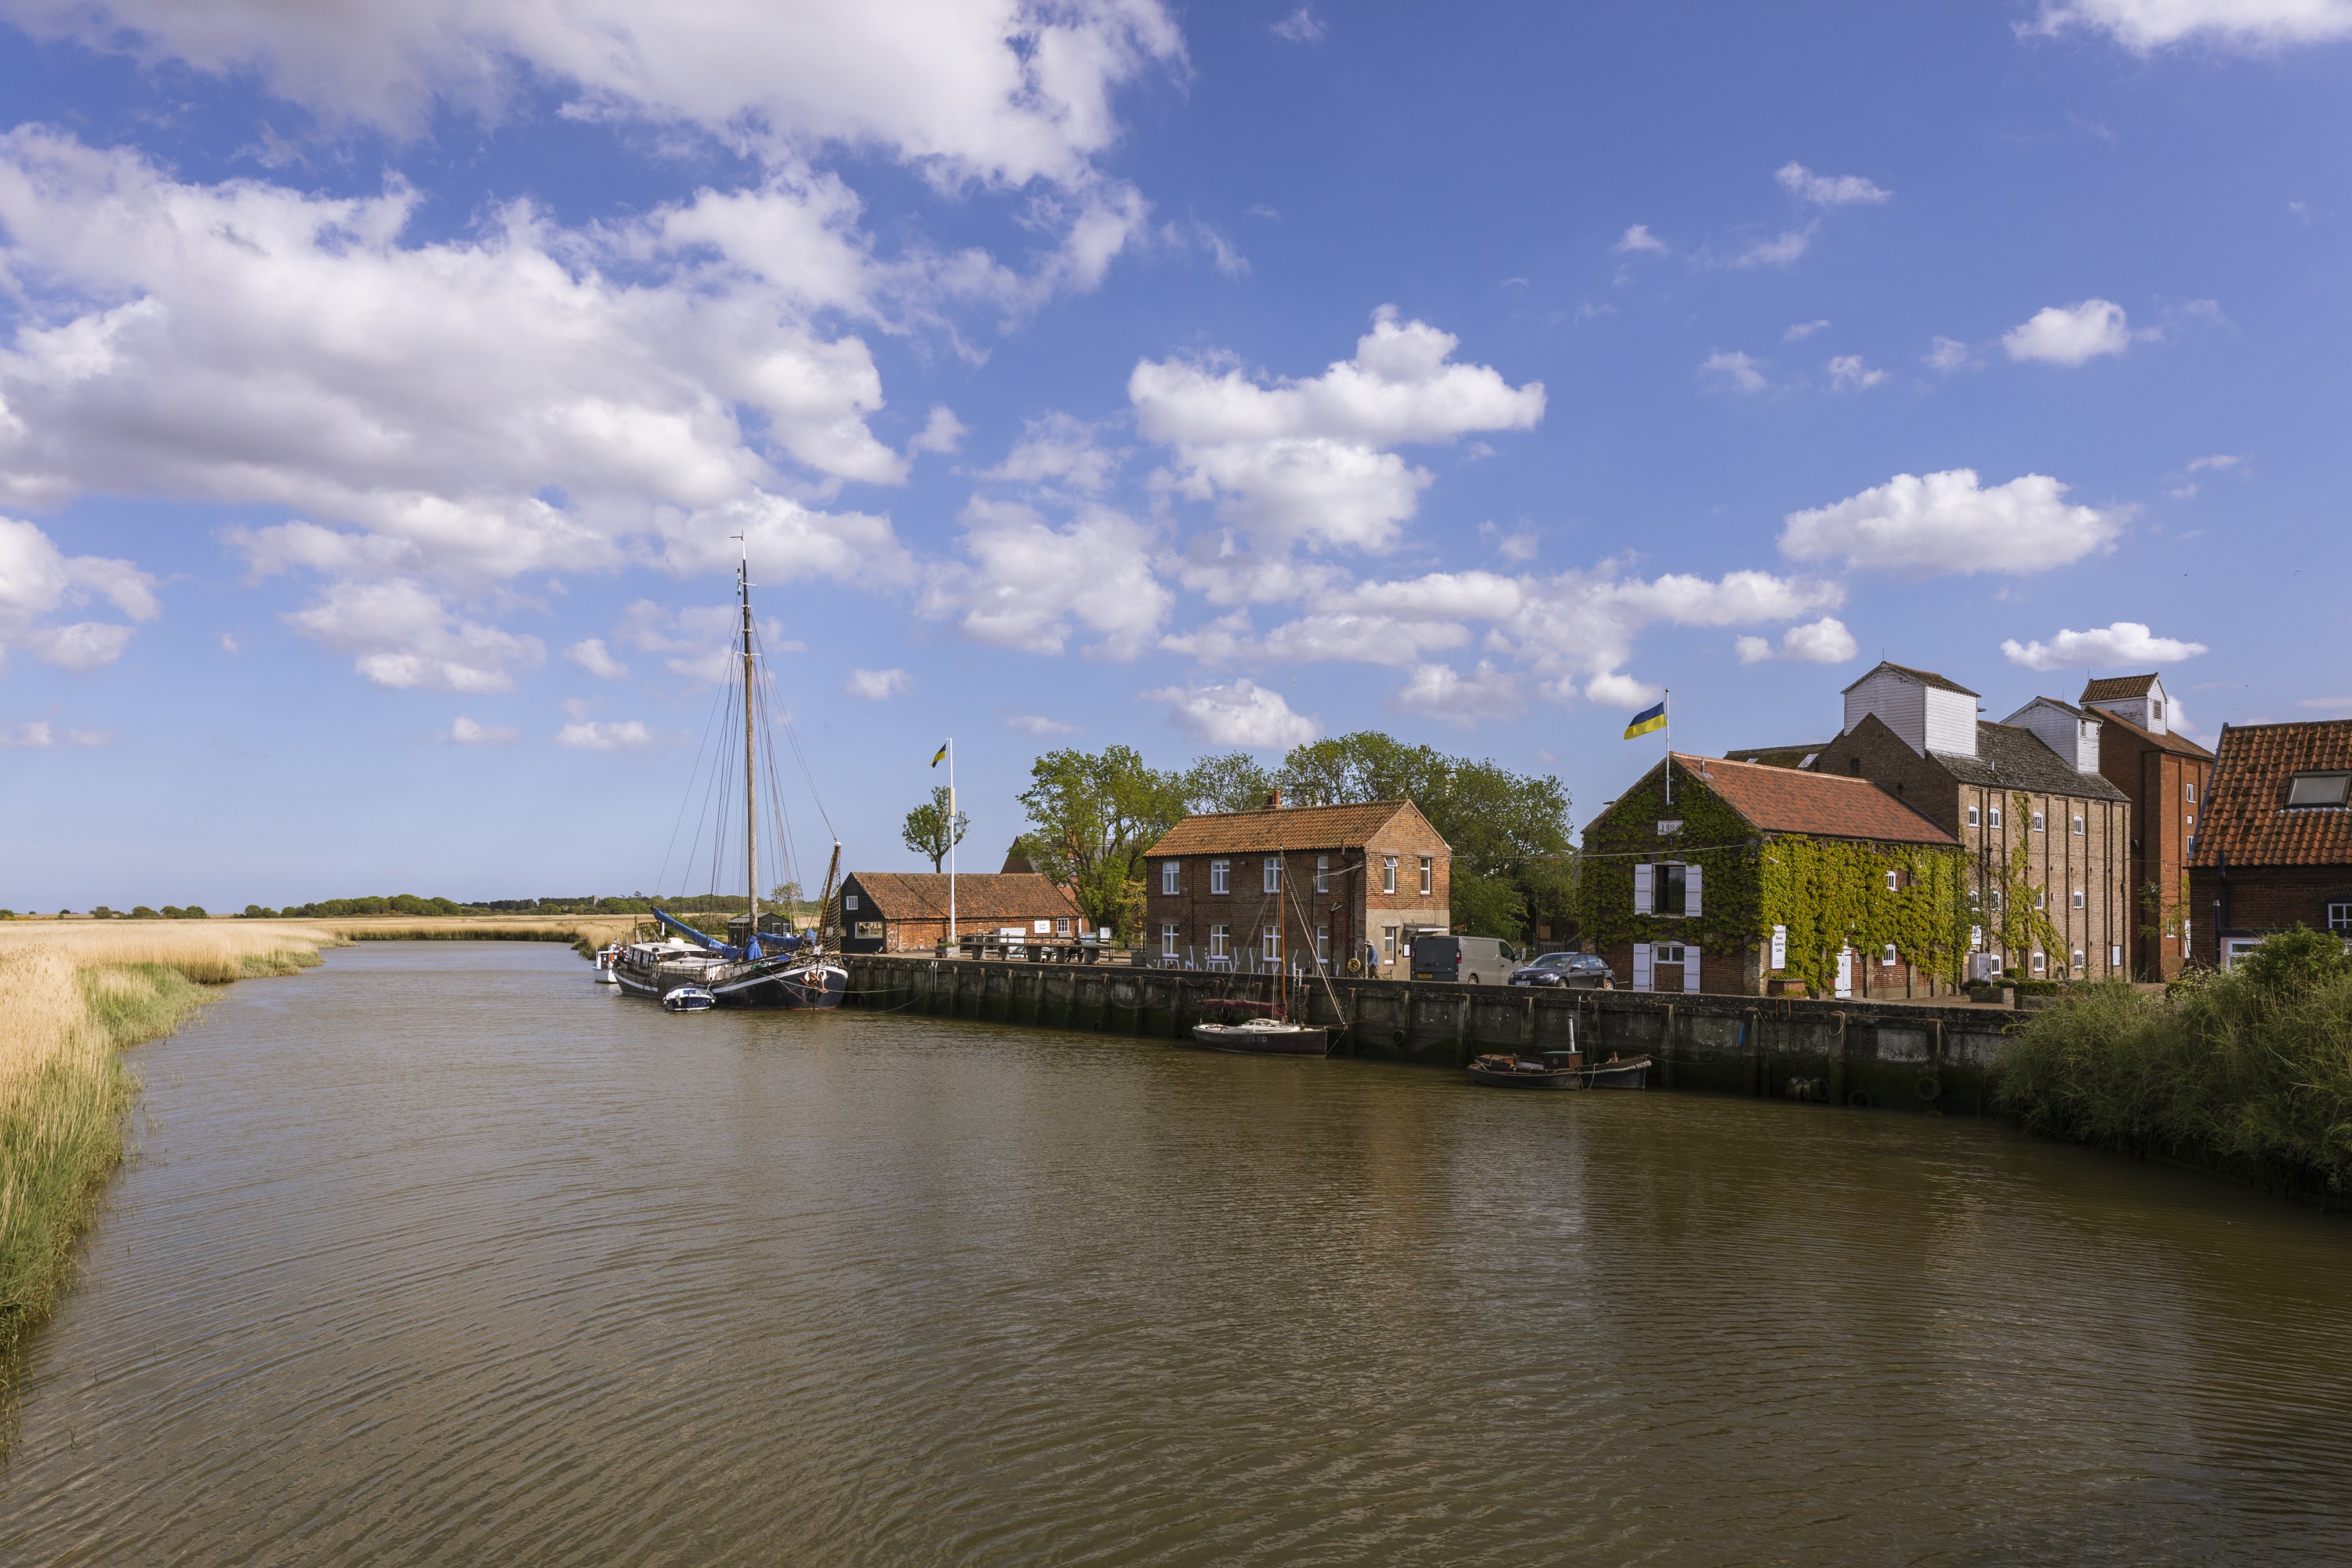 Buildings at the Snape Maltings complex, on the bank of the River Alde in Suffolk. (Stella Fitzgerald/Historic England Archive/ PA)